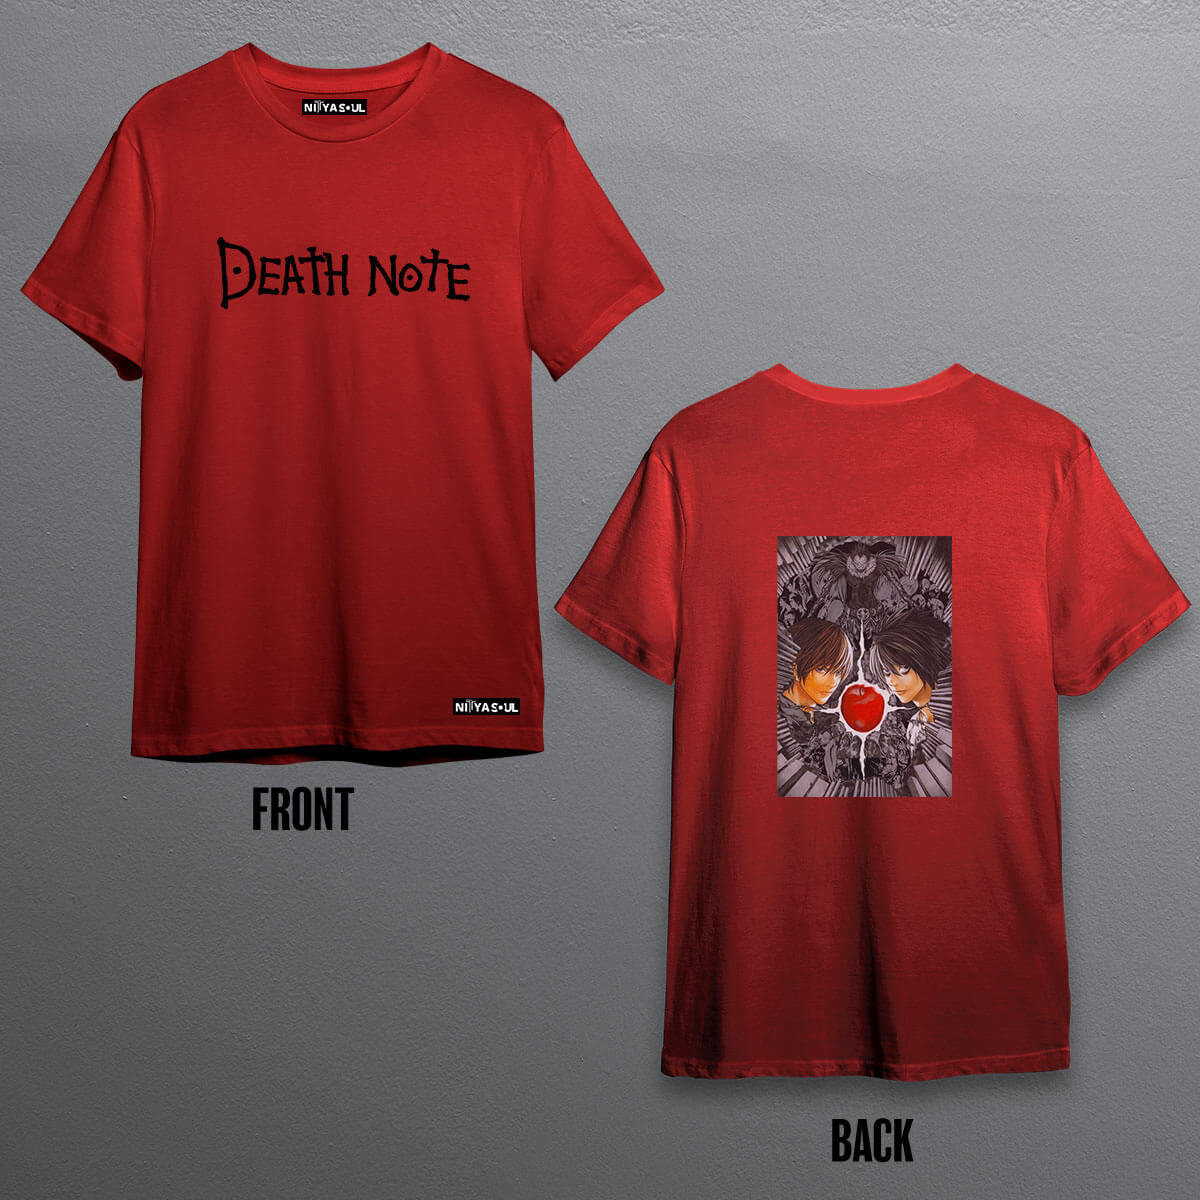 new-front-back-tee1-new-front-back-teeg